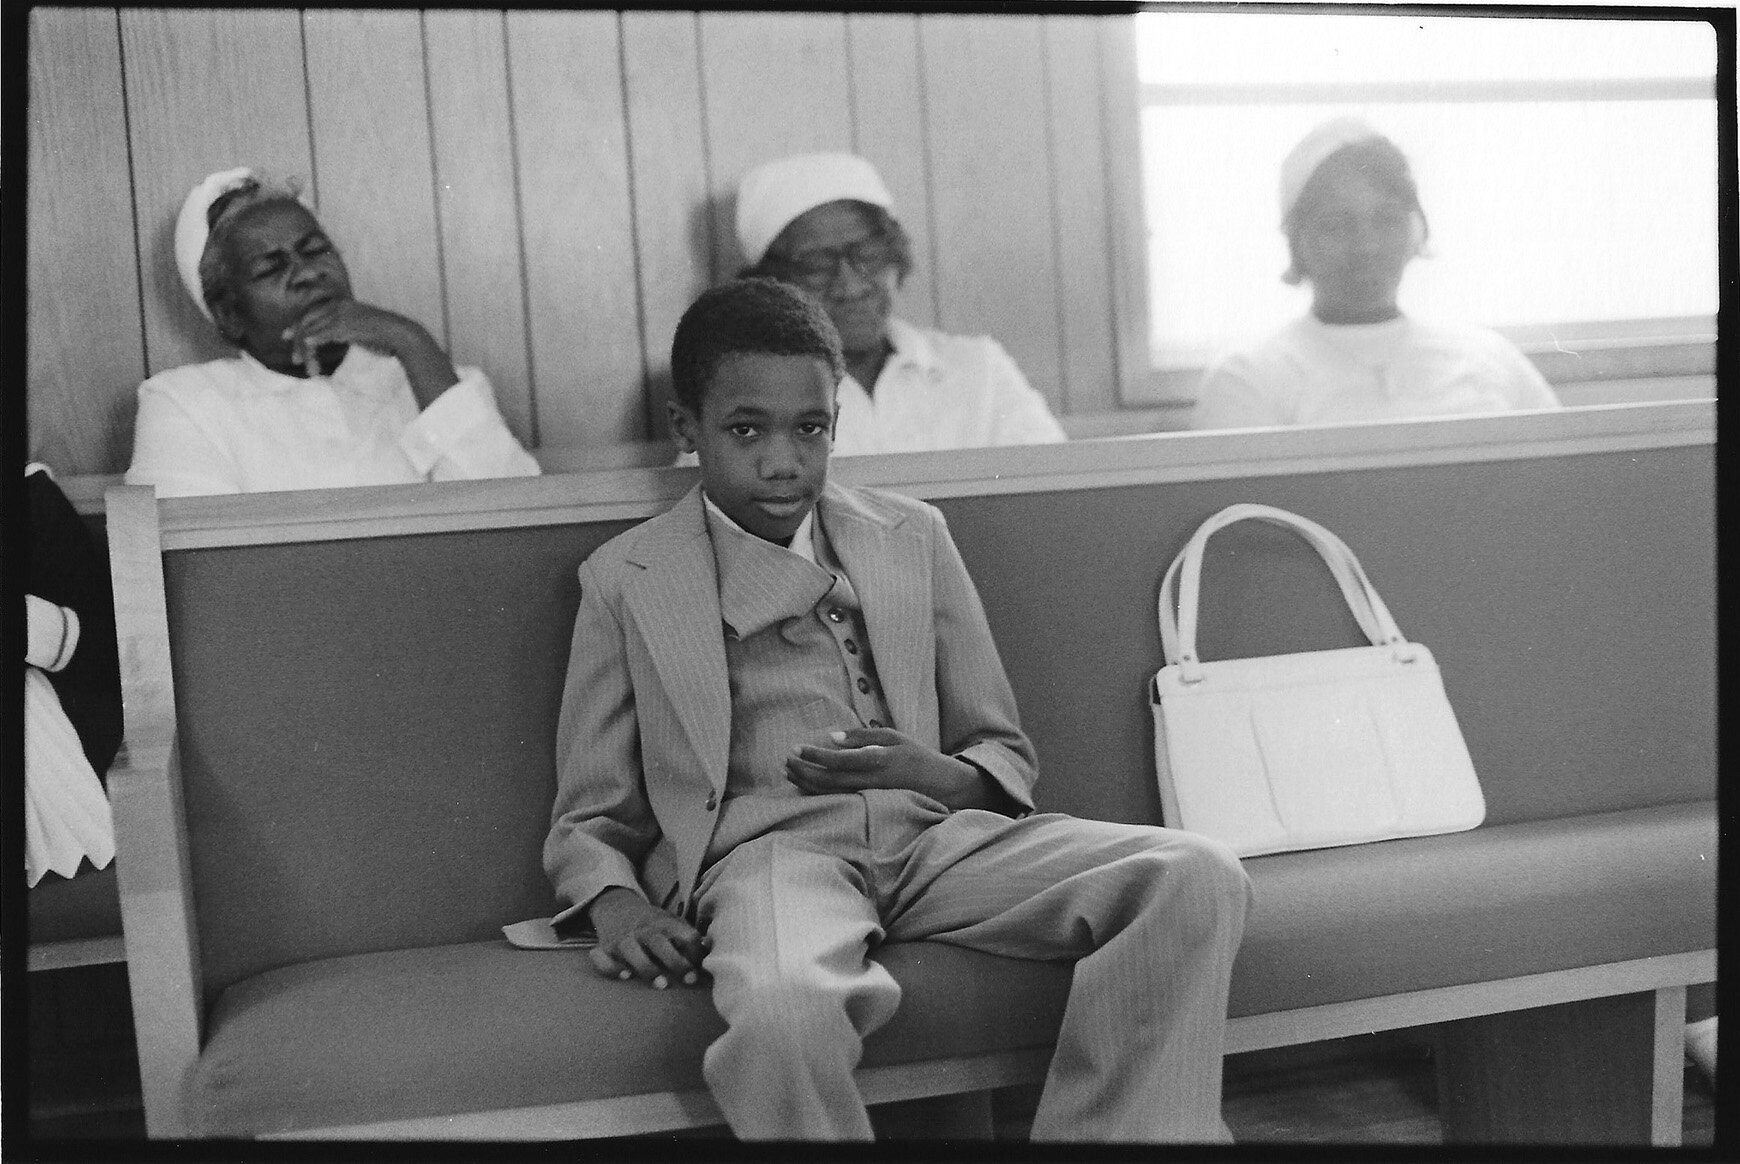   Boy Guarding Purse, Dry Springs African Methodist Episcopal Church, Climax, GA  Image: 1979/printed: 2020   Gelatin silver print 5 1⁄4 x 7 3⁄4 in. (image size) The Do Good Fund, Inc.,2020-041 